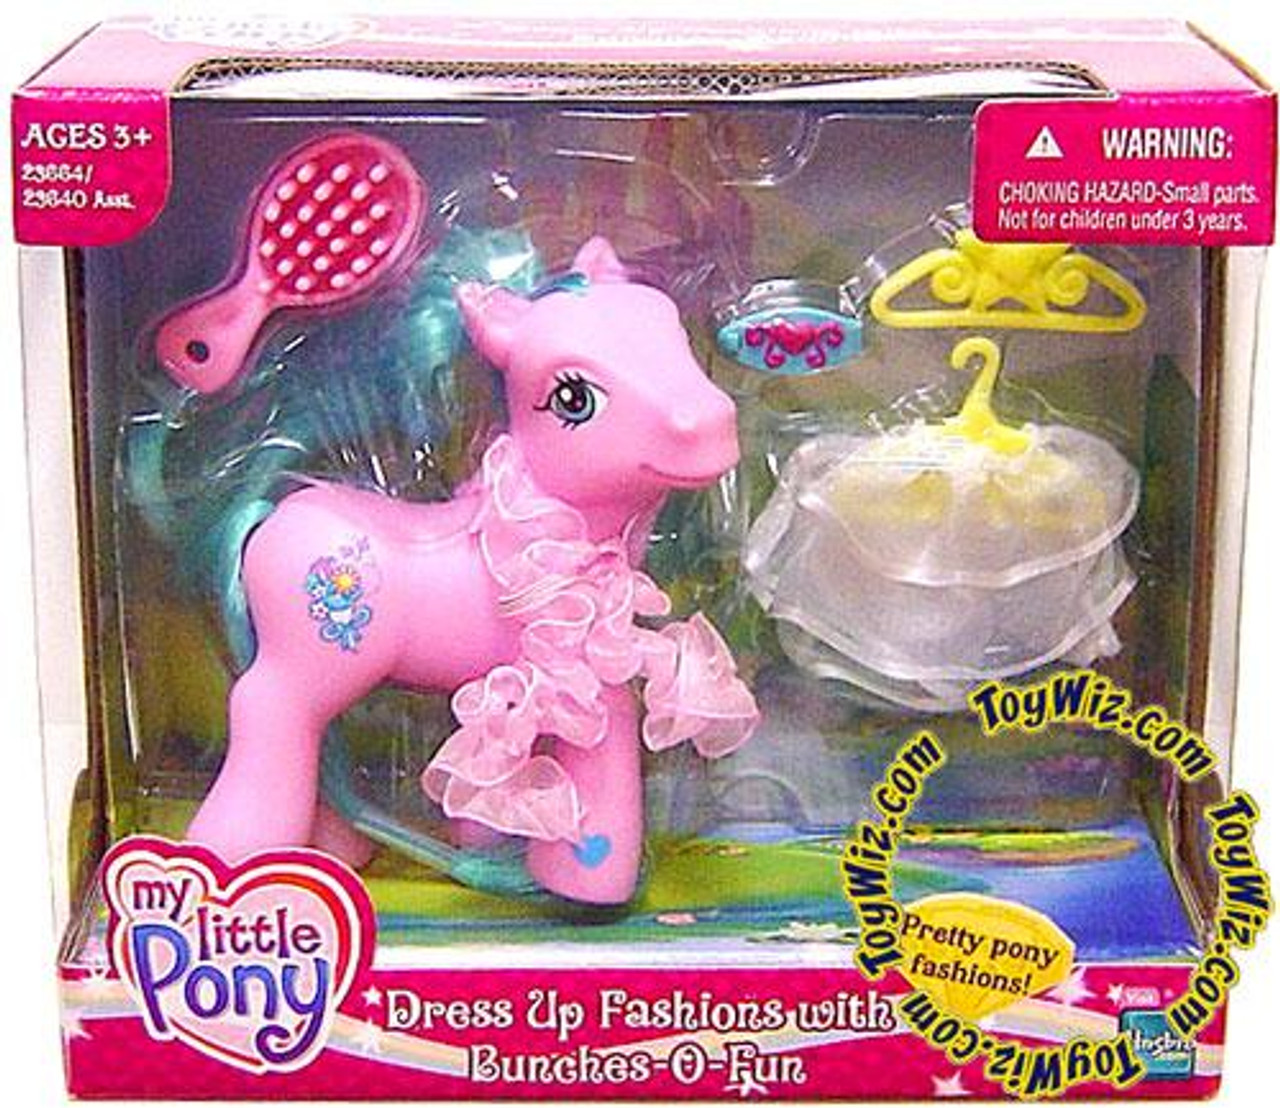 My Little Pony Classic Exclusives Dress Up Fashions with Bunches O Fun Exclusive Figure Set 